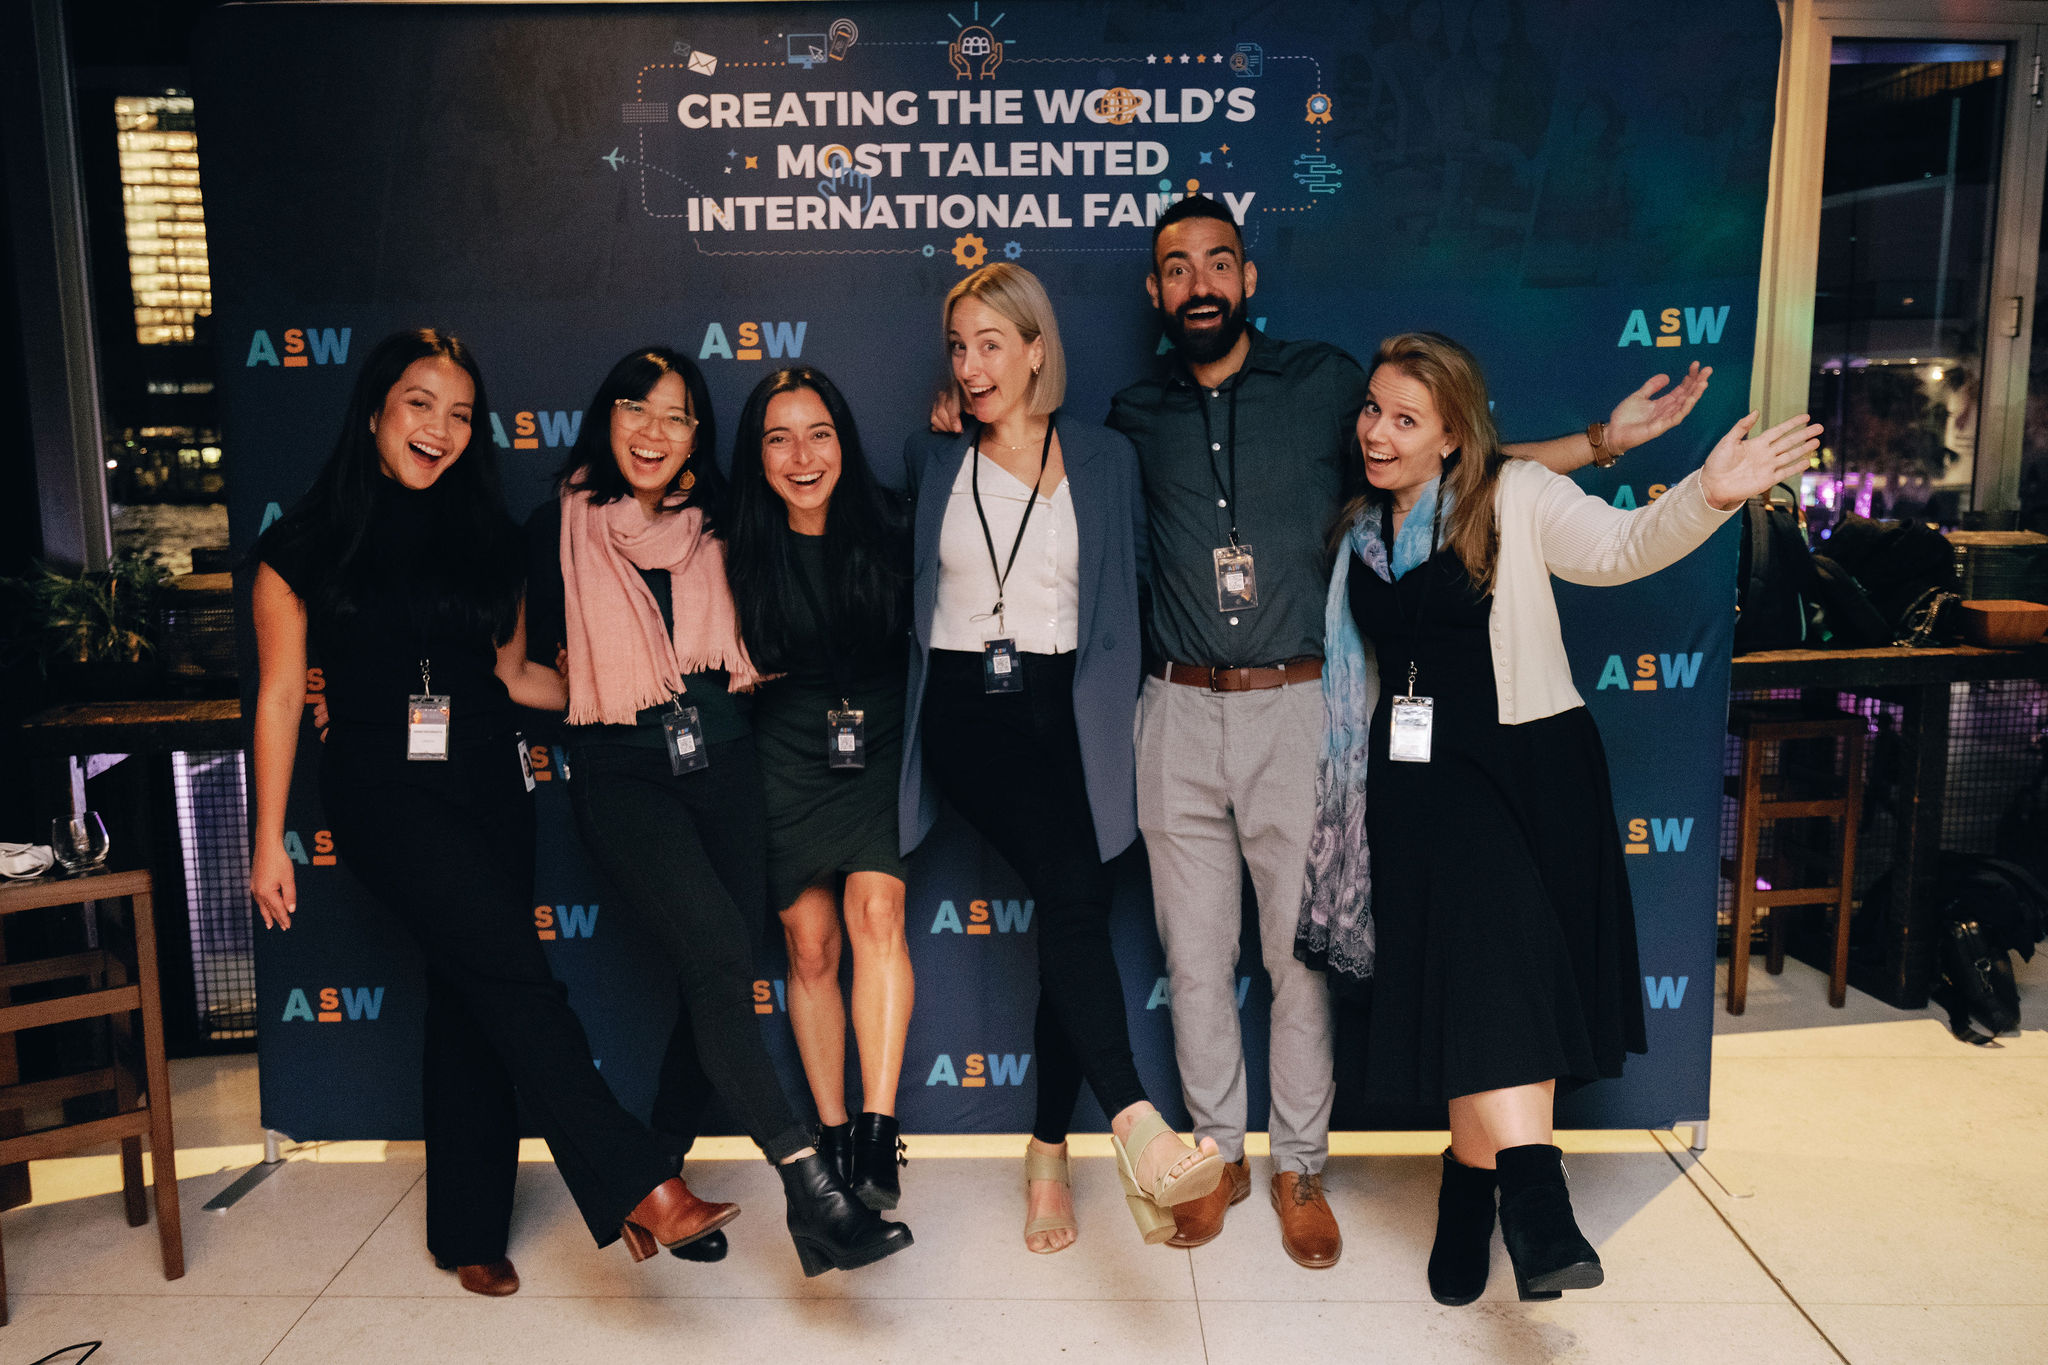 ASW Global Partnership Events in Melbourne and Sydney